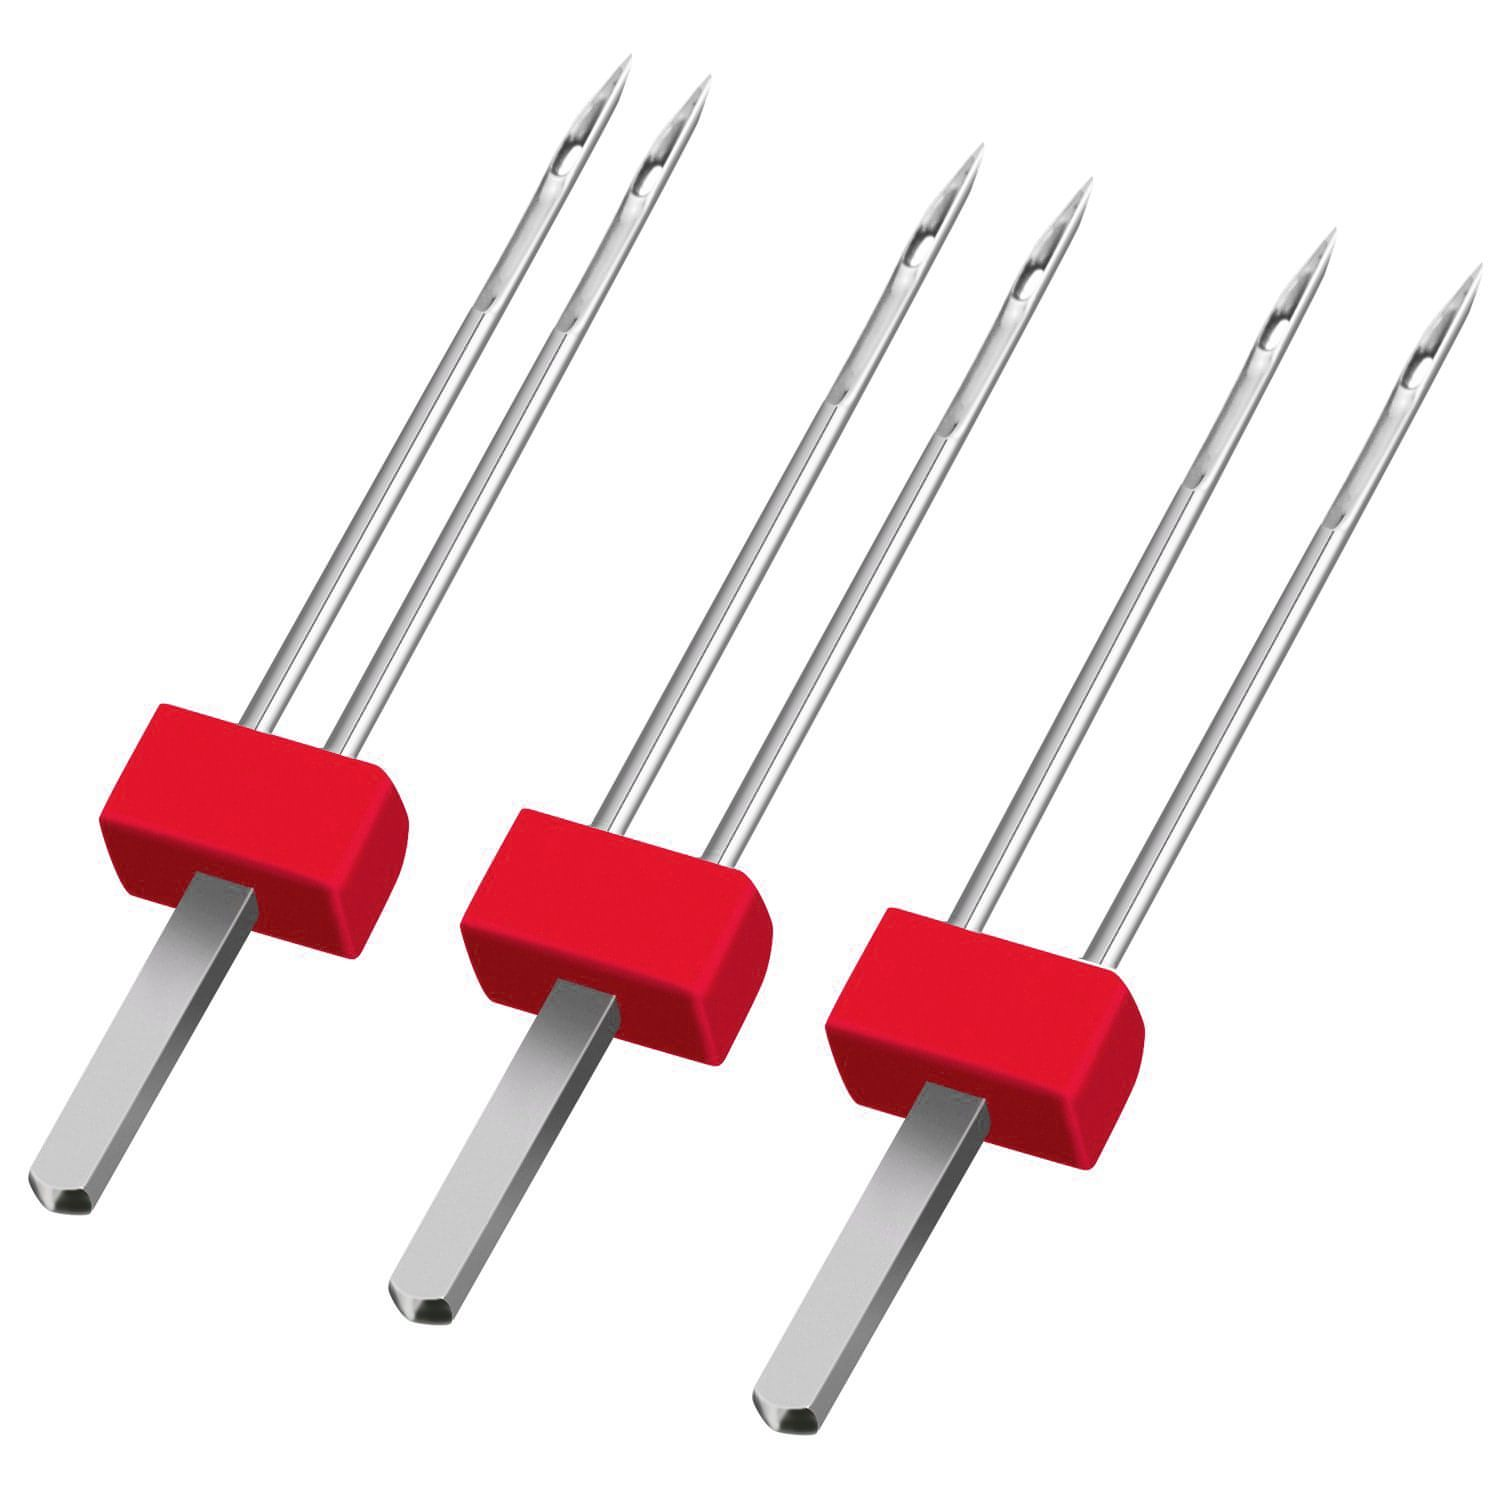 Twin Needle 3 pack, 90 (medium weight) 3 sizes - 2mm, 3mm, 4mm